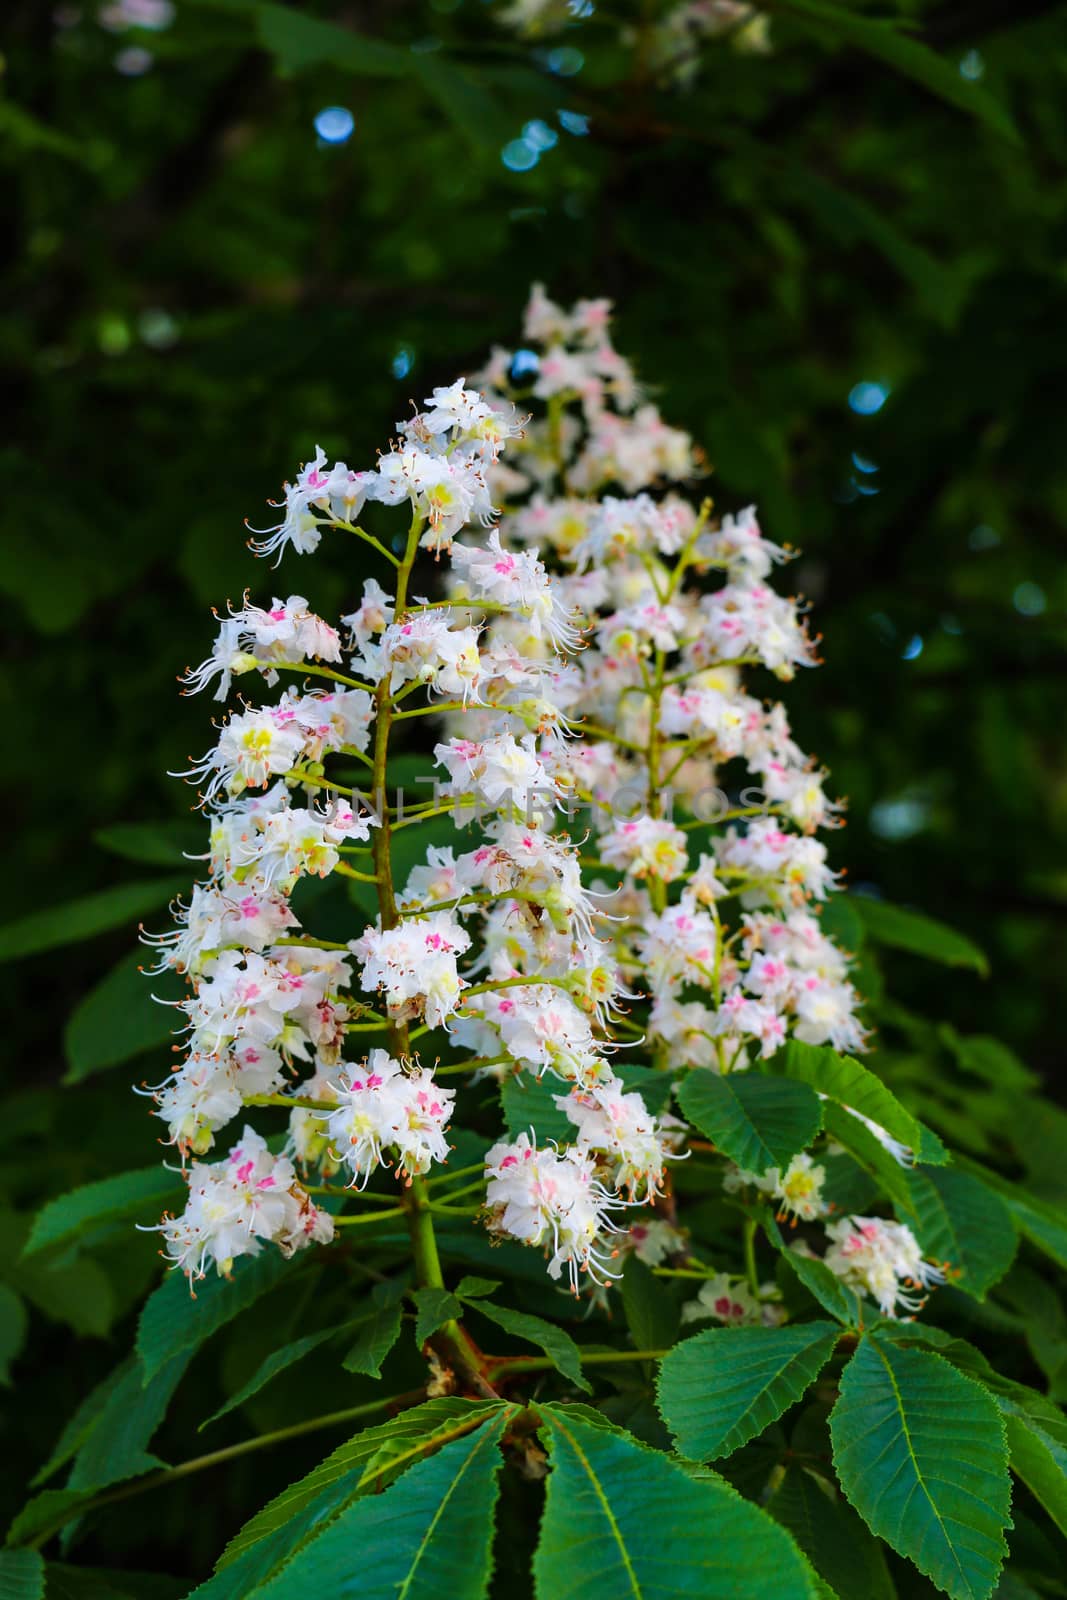 Macro photo of blooming chestnut flowers. Horse-chestnut or aesculus hippocastanum blossom. Close-up. by kip02kas